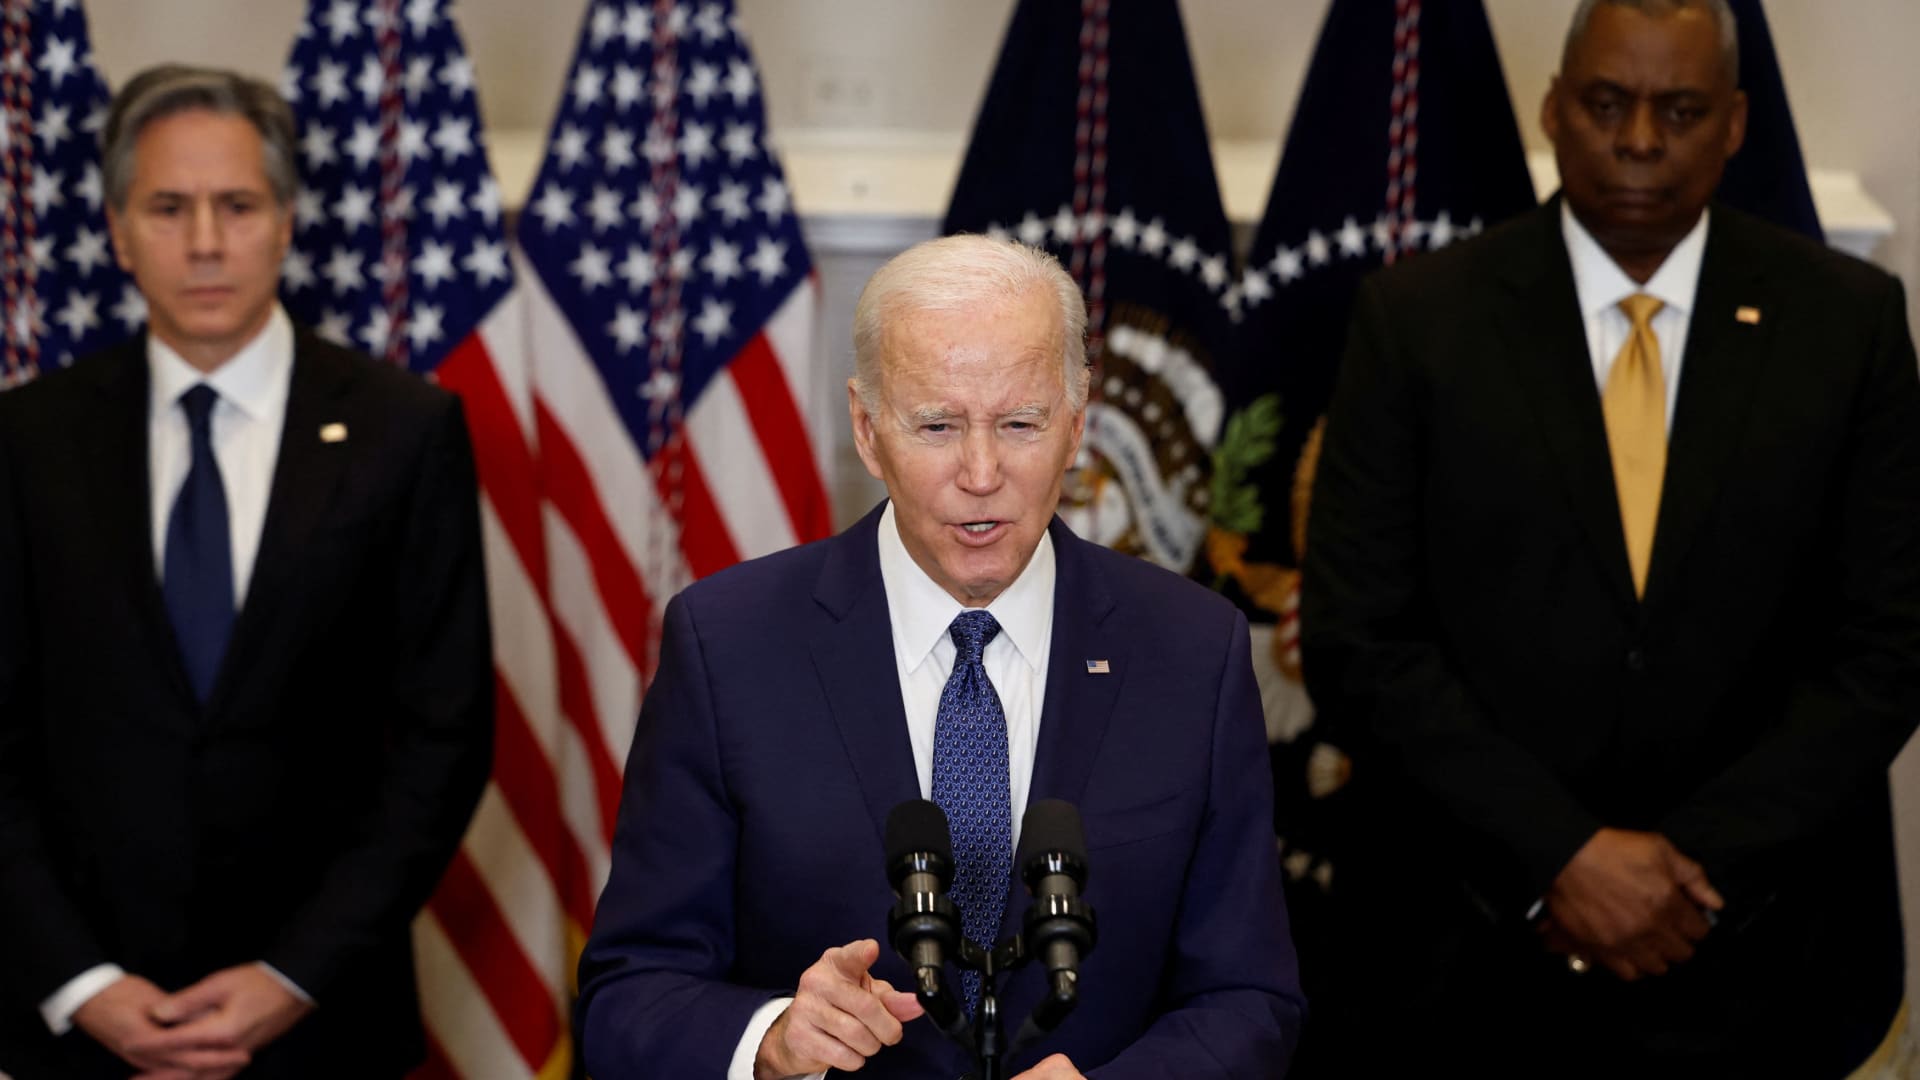 Watch live: Biden to tout job growth and slowing inflation rates in speech on economy